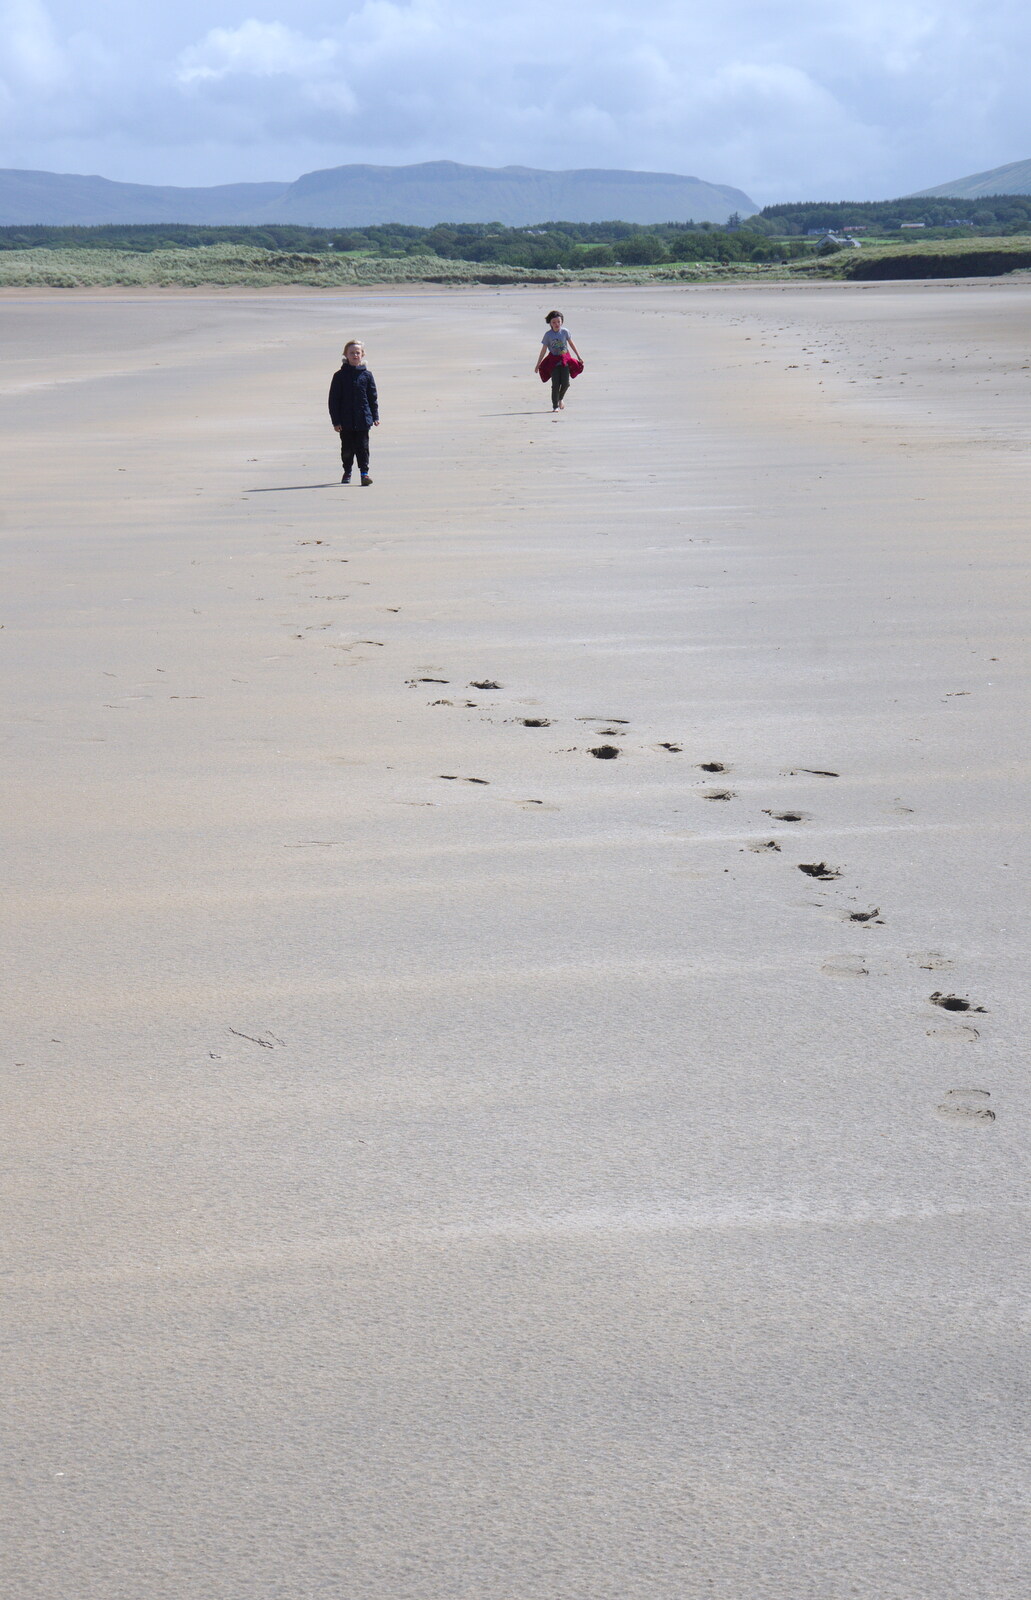 Footprints on the beach from Mullaghmore Beach and Marble Arch Caves, Sligo and Fermanagh, Ireland - 19th August 2019